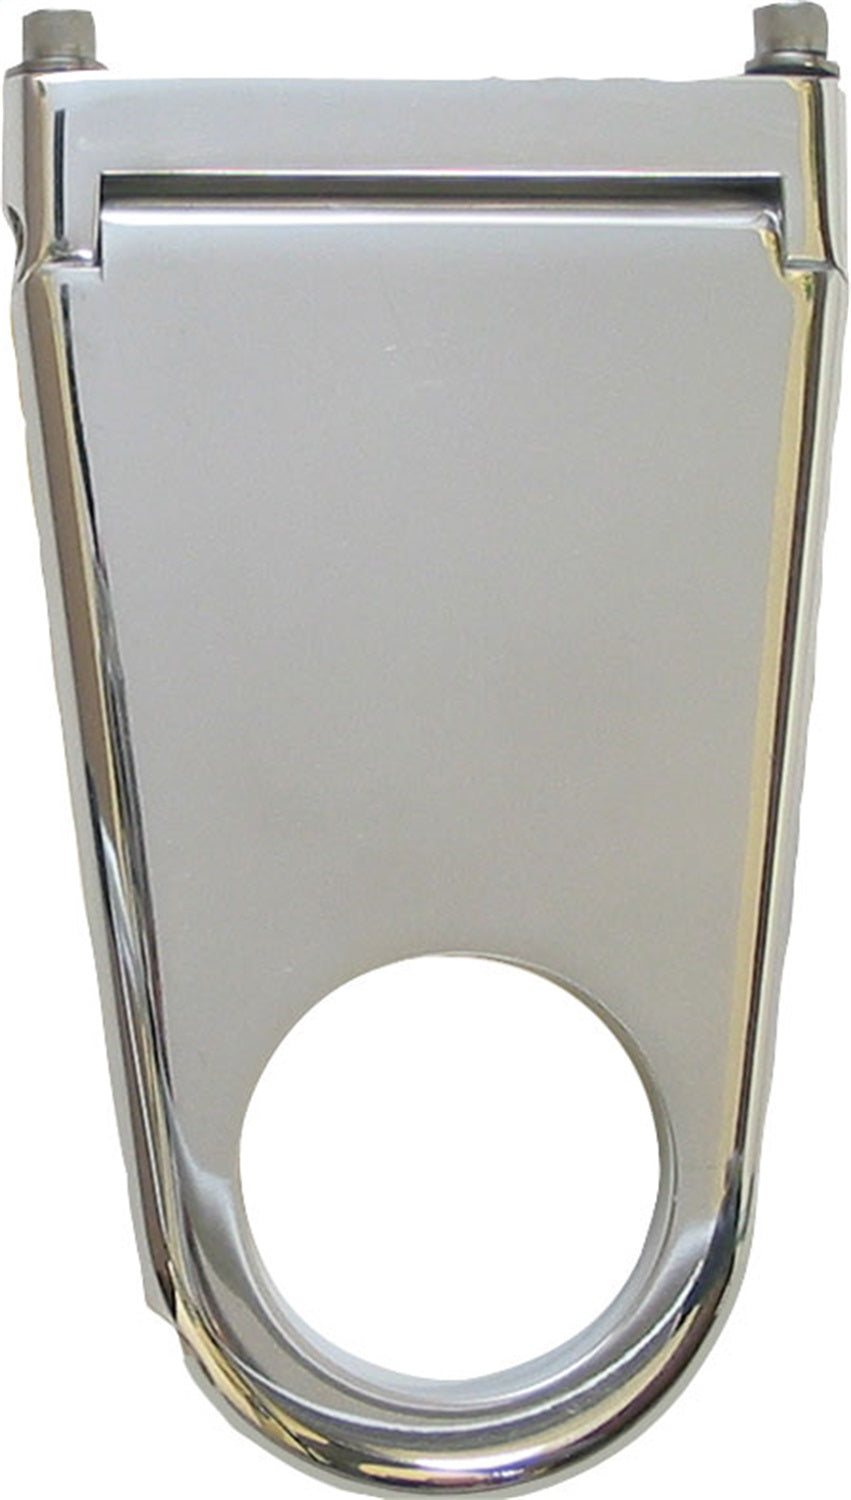 Borgeson Column Drop Blank Style 2-1/4in. Column X 4in. Drop Polished Aluminum 911224